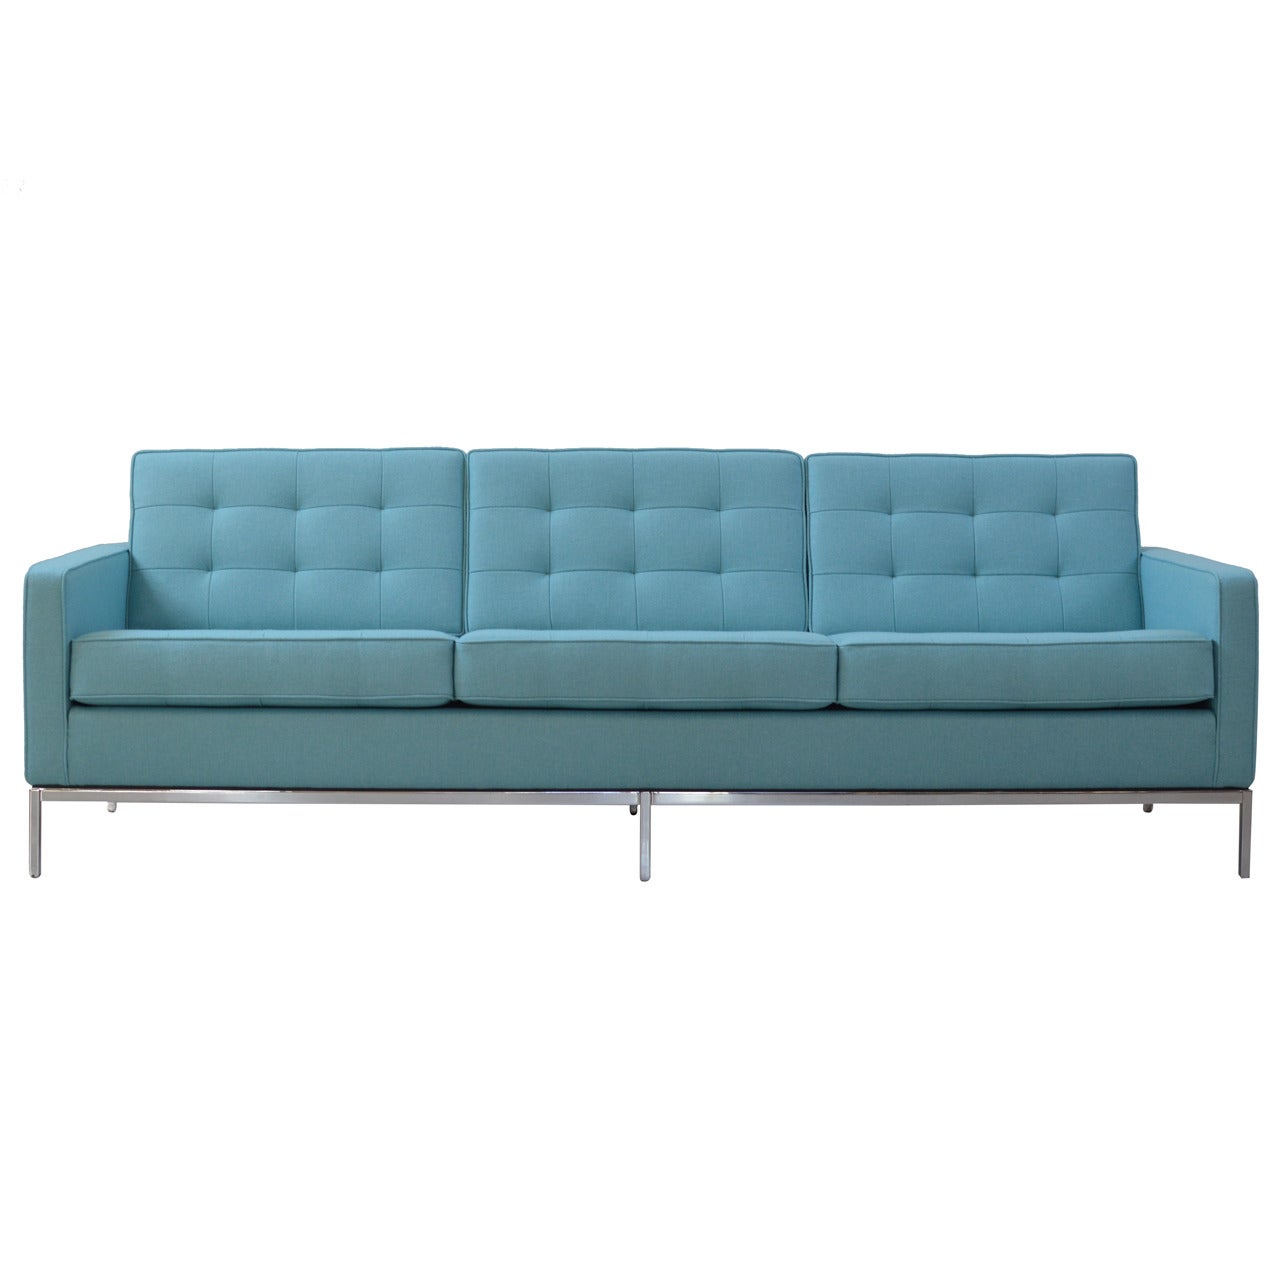 Three-Seat Lounge Sofa by Florence Knoll for Knoll